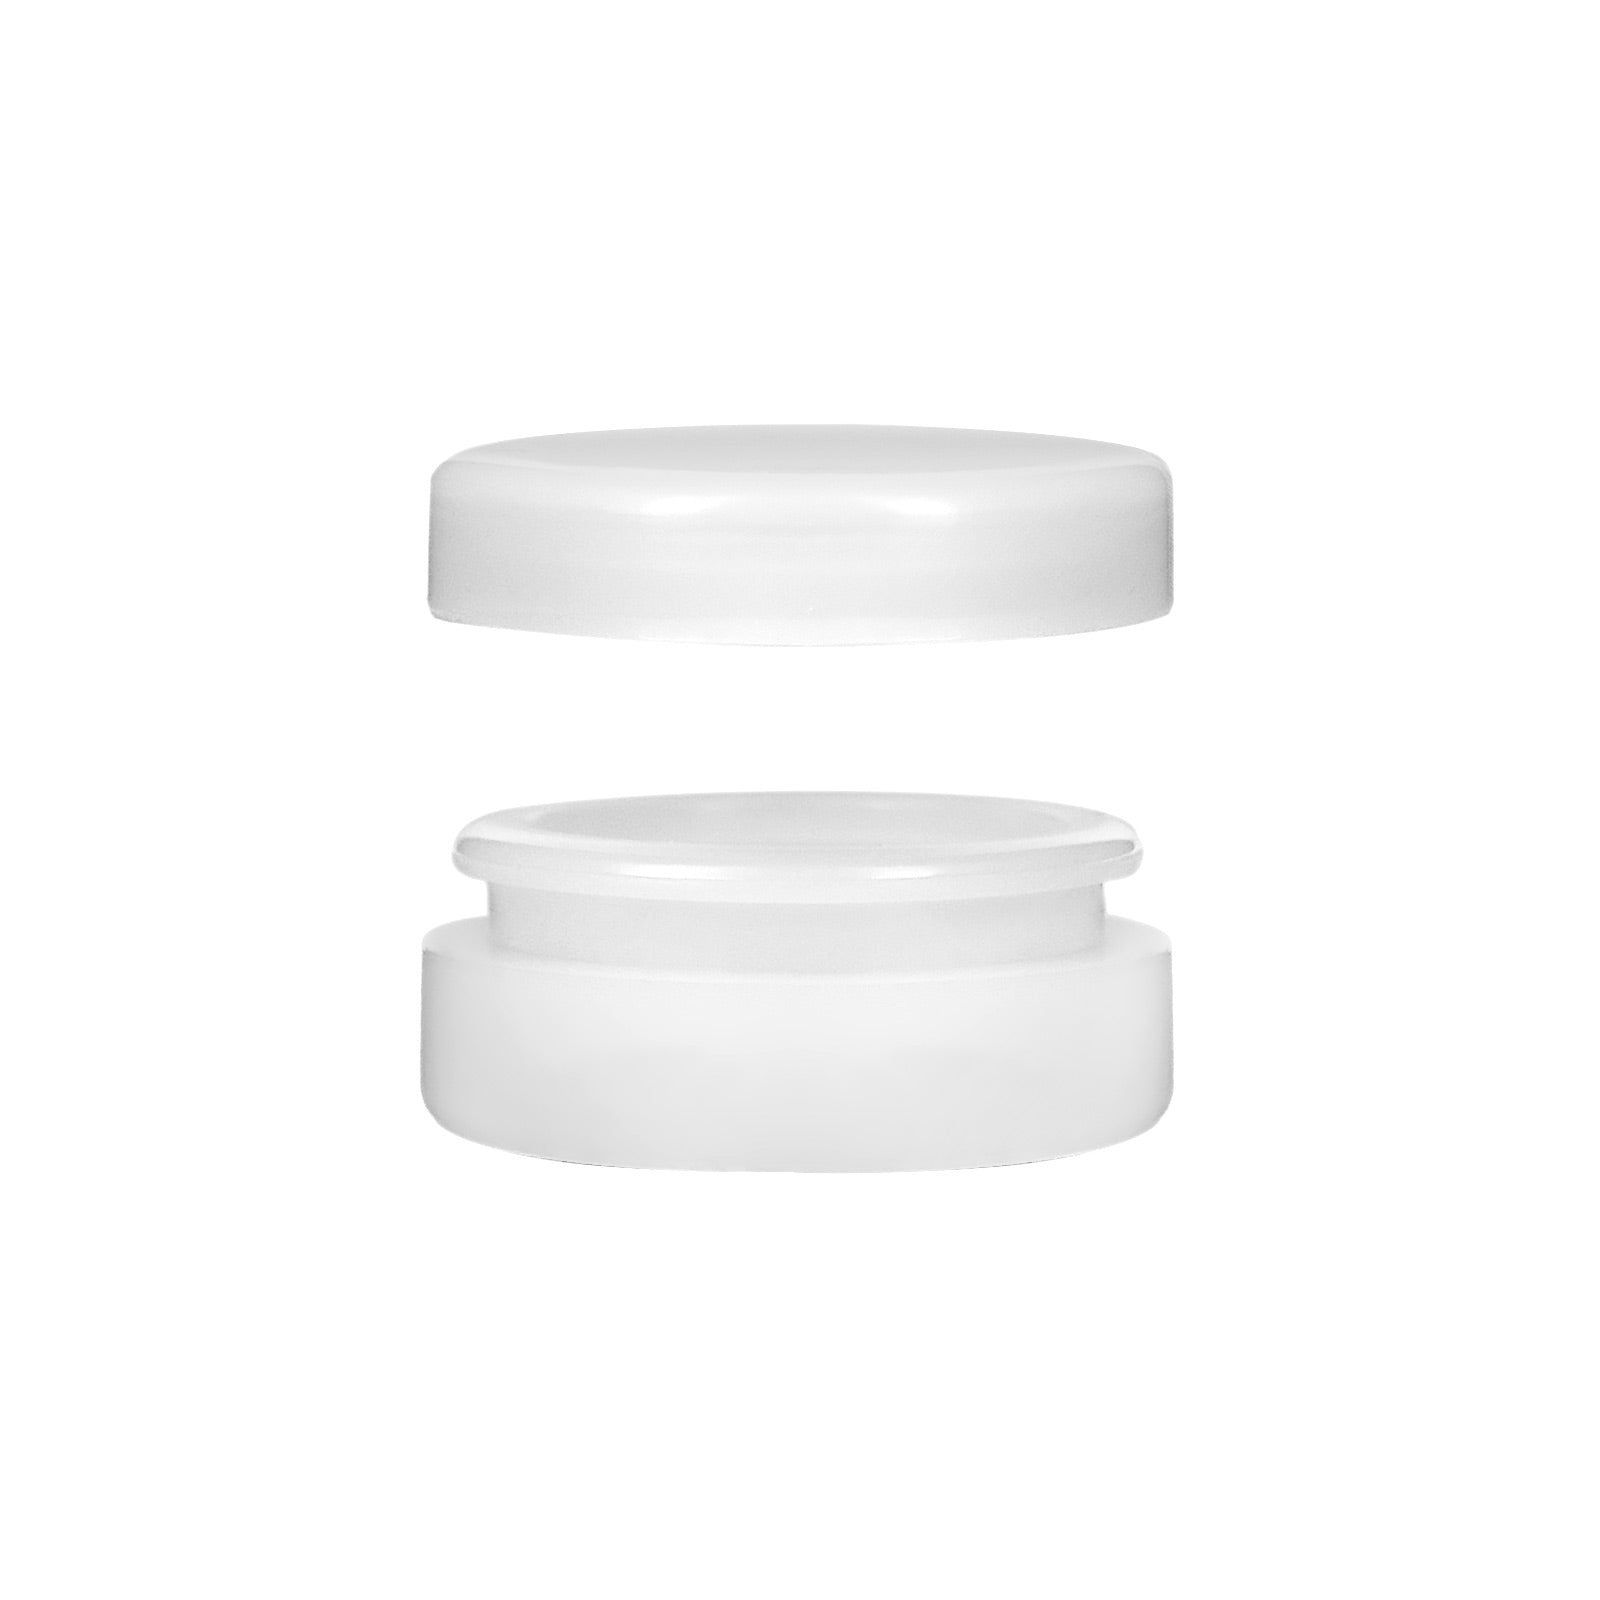 5ml Silicone Concentrate Containers - 250 Count